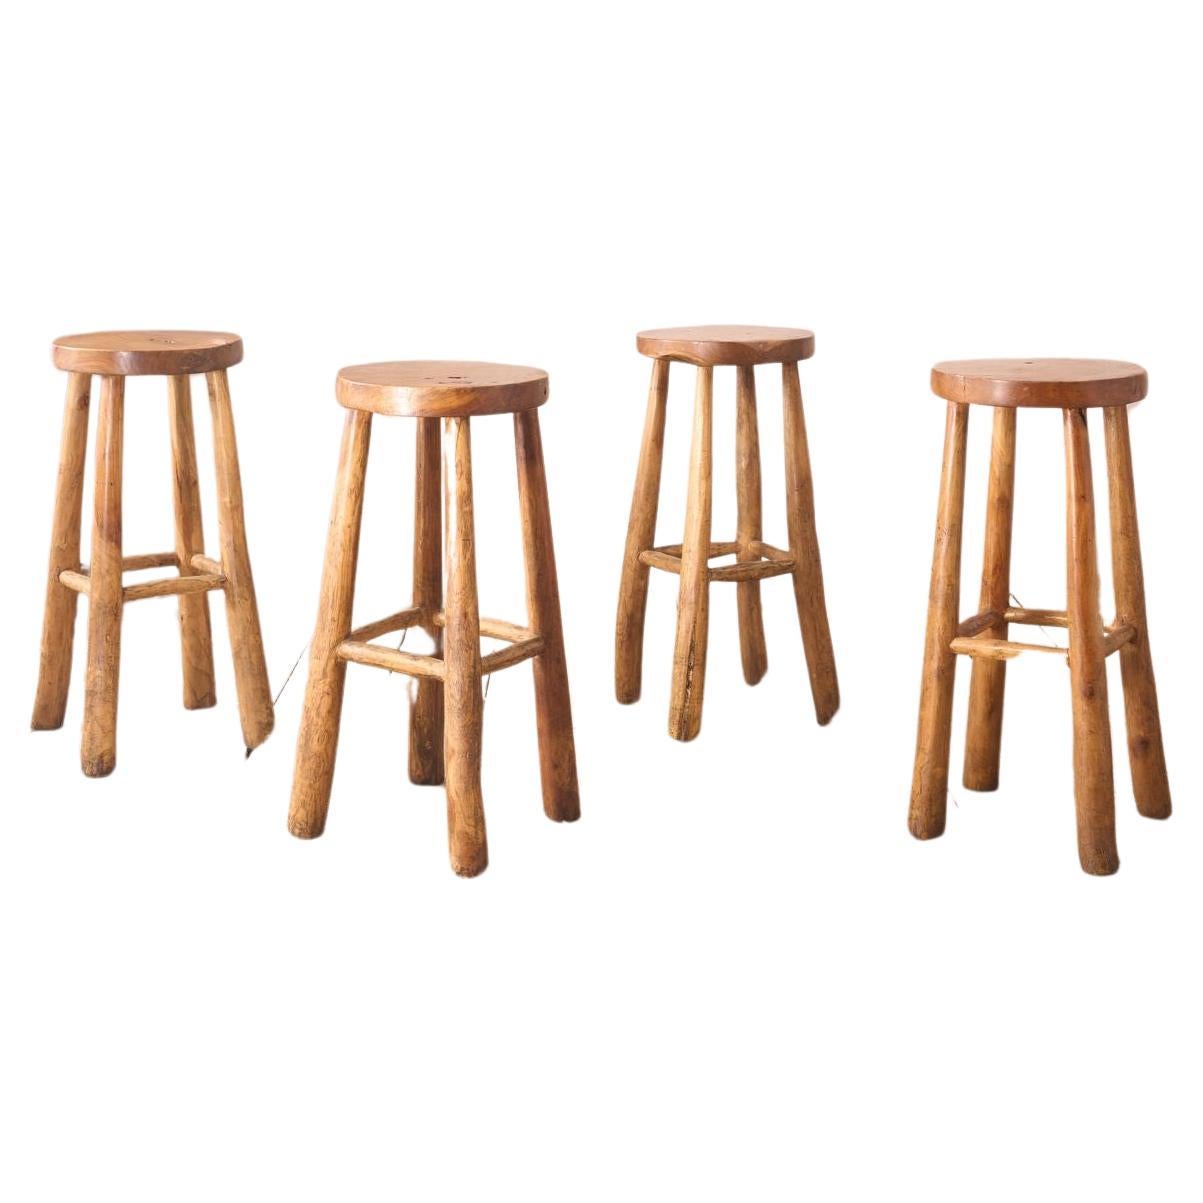 Set of 4 Cherrywood bar stools For Sale